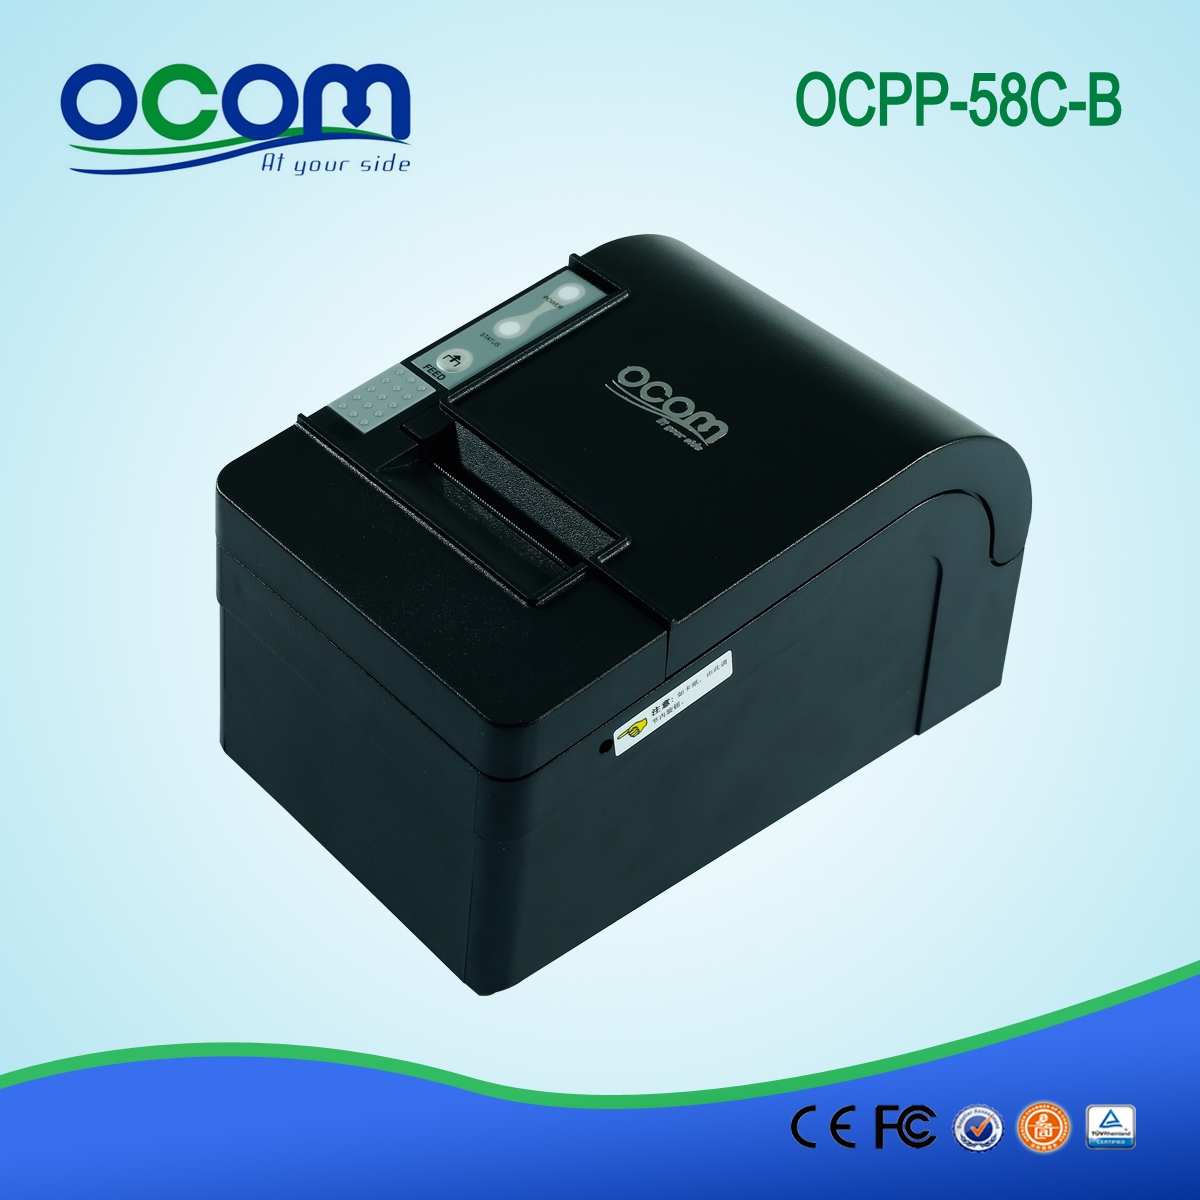 58mm thermal receipt printer with auto cutter OCPP-58C-L LAN/Ethernet Port